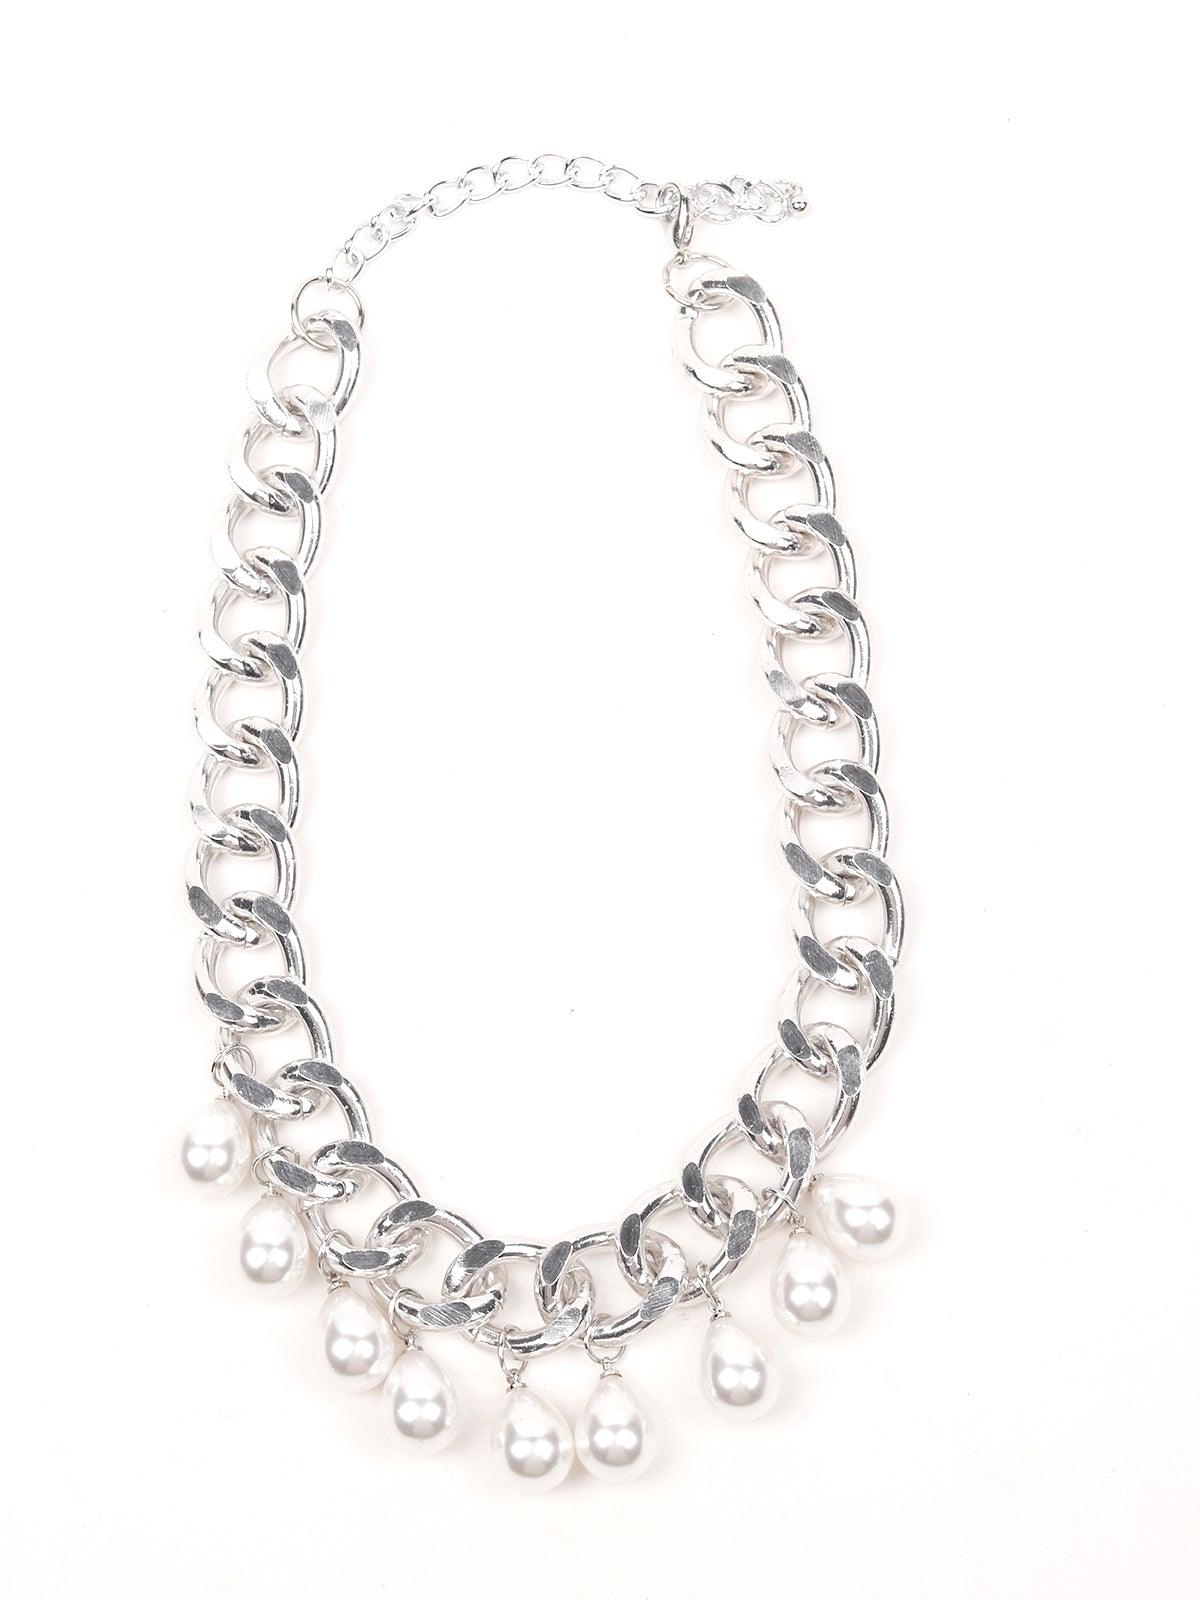 Women's Stunning Interlinked Silver Chain With White Stones Embedded. - Odette